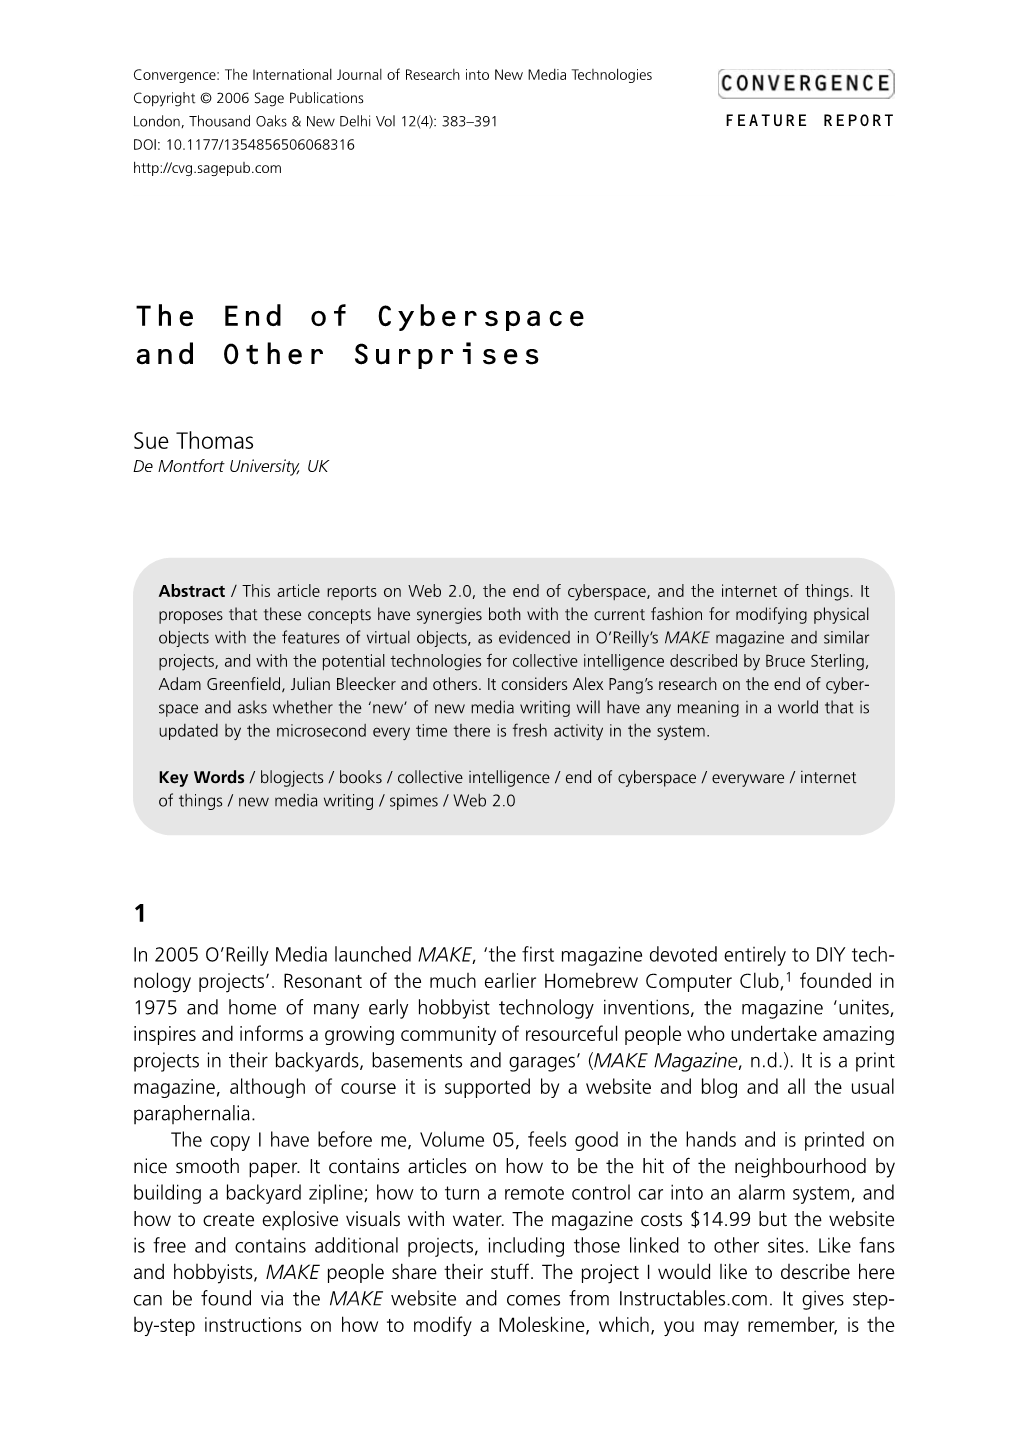 The End of Cyberspace and Other Surprises